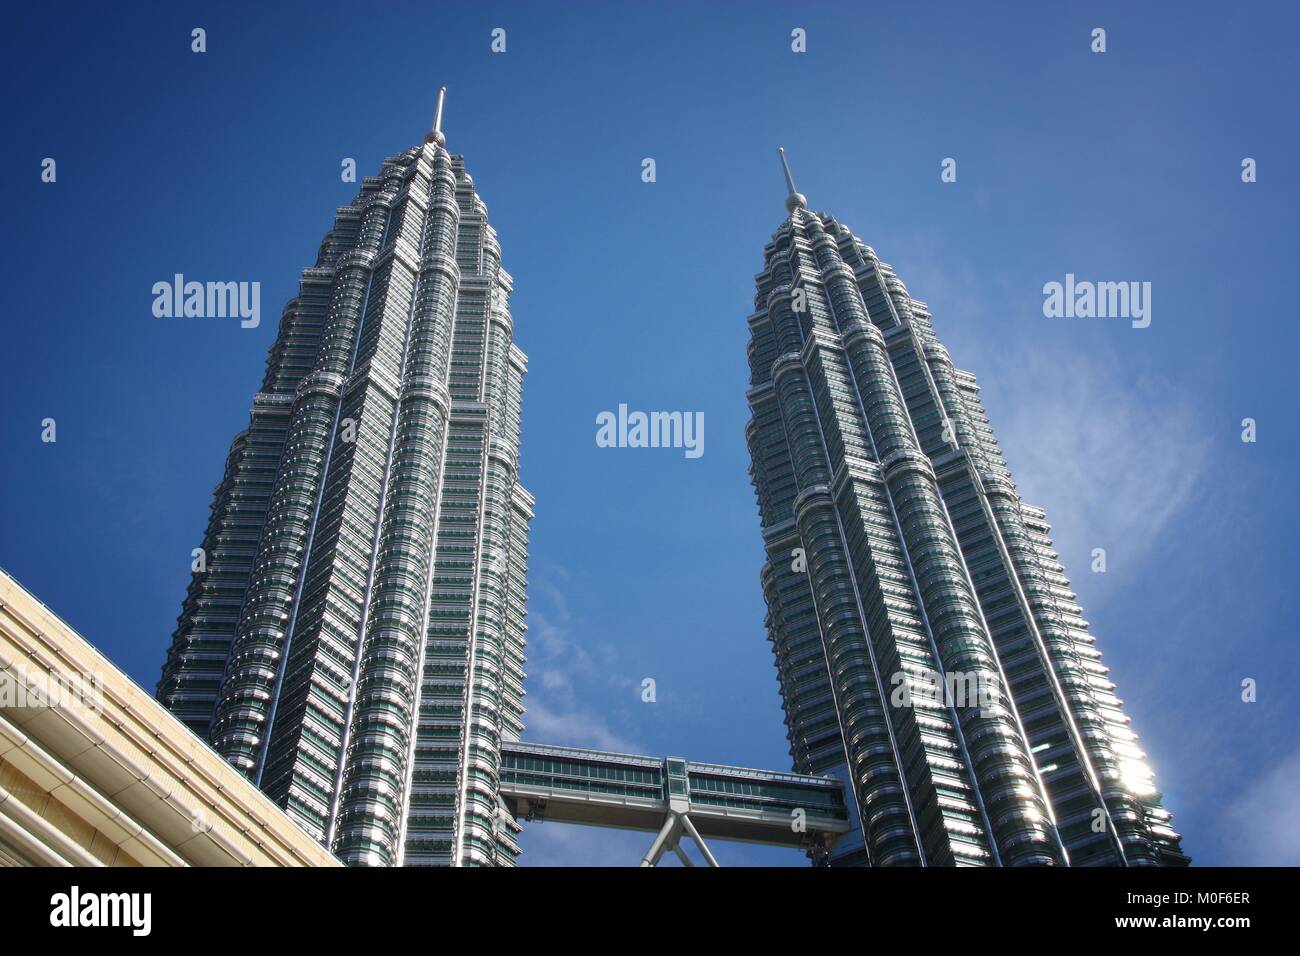 KUALA LUMPUR, MALAYSIA - MARCH 29, 2009: Petronas Towers skyscraper in Kuala Lumpur, Malaysia. Petronas is the 7th tallest building in the world as of Stock Photo